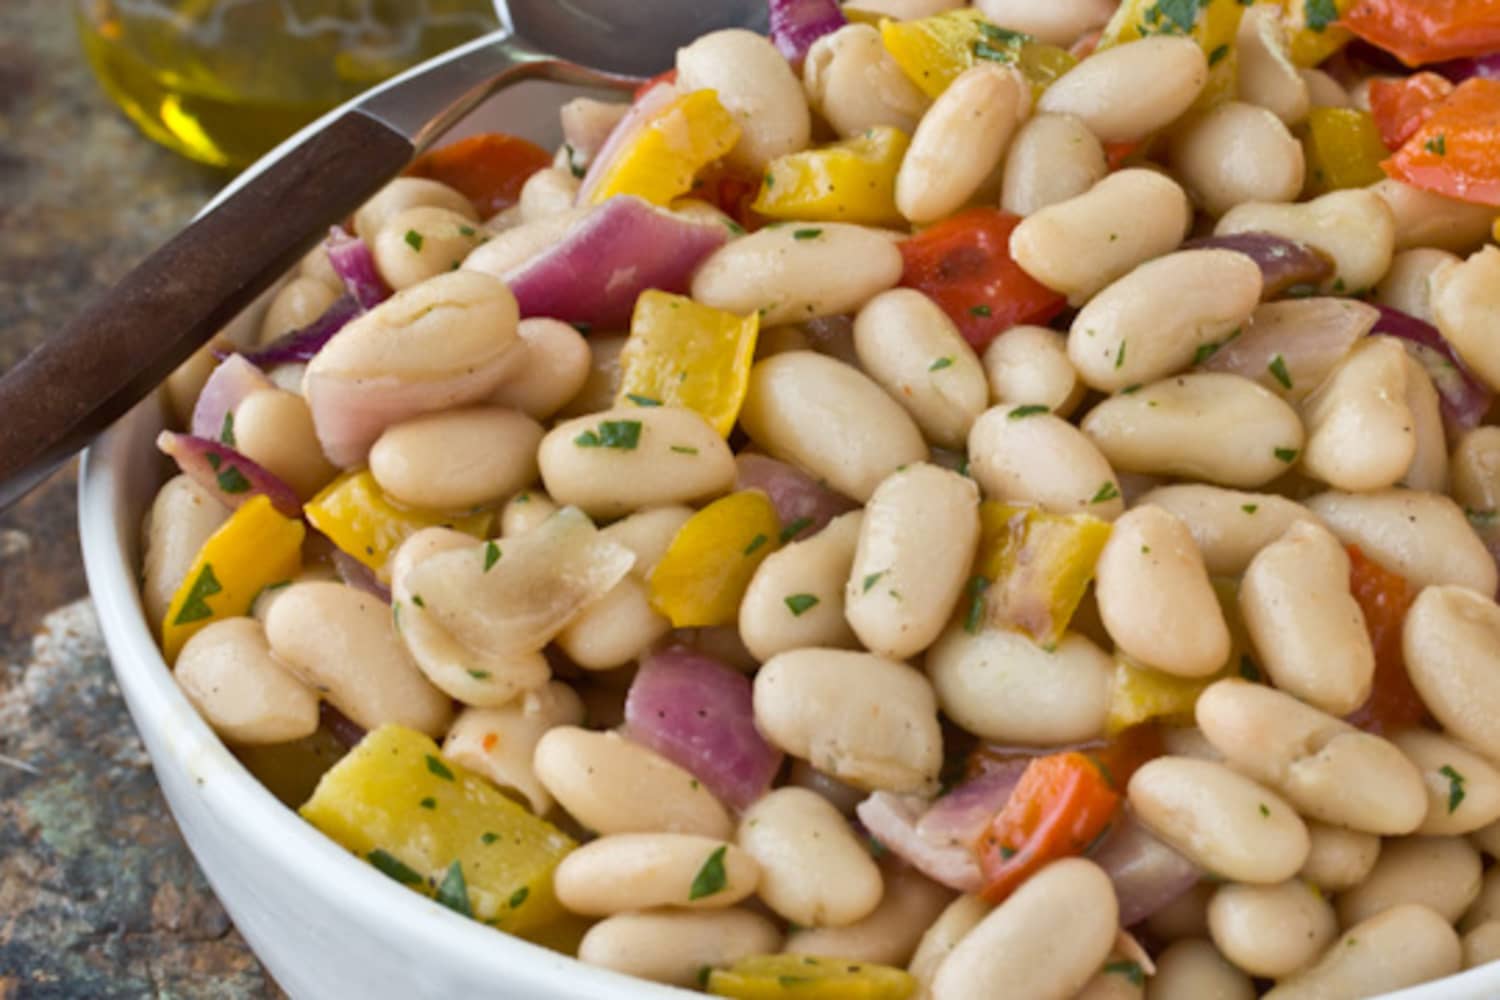 Healthy Recipe: White Bean & Roasted Vegetable Salad | The Kitchn